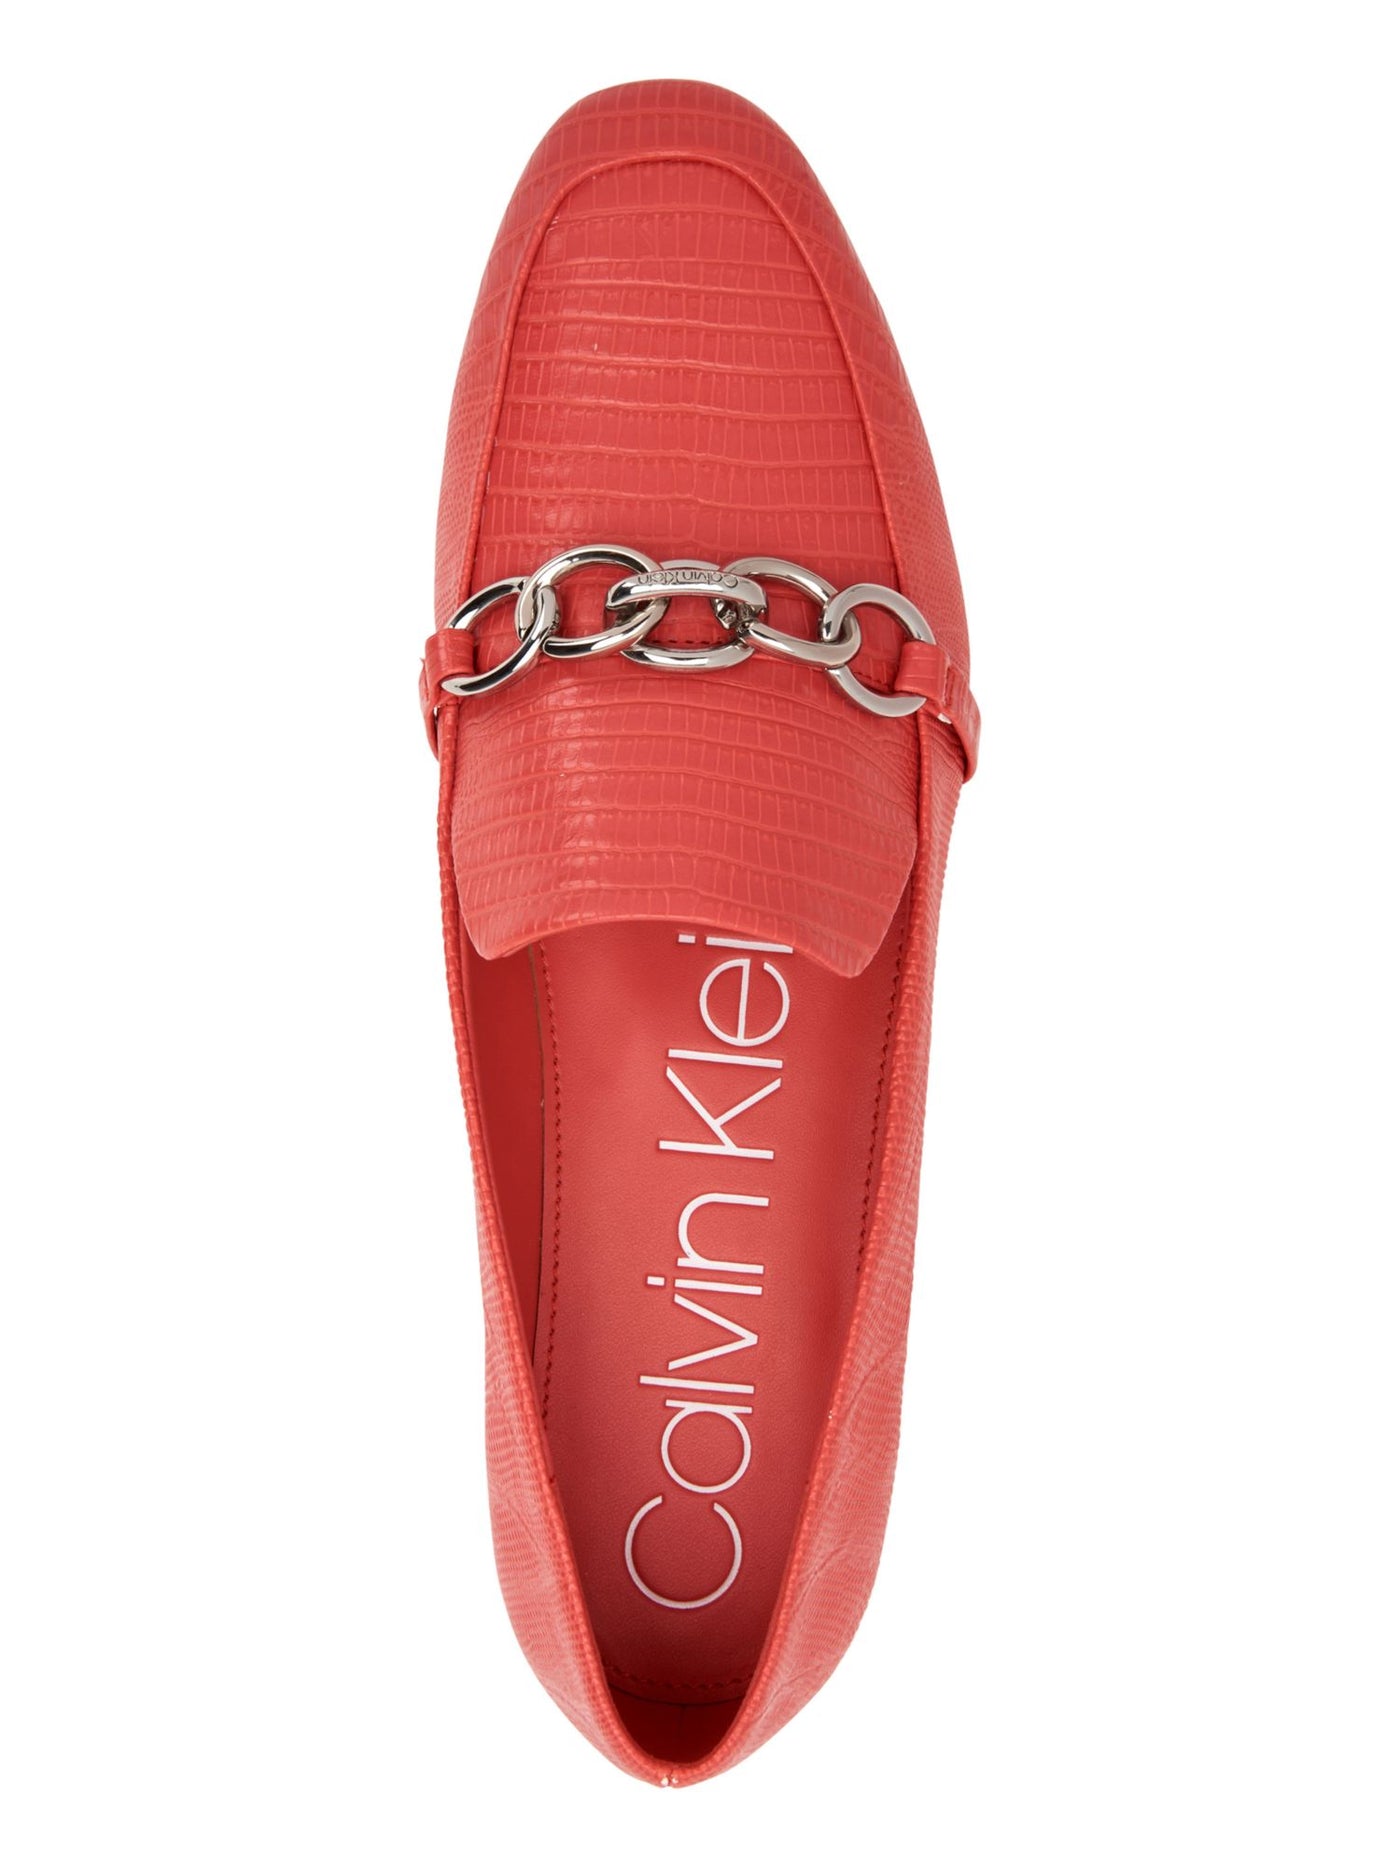 CALVIN KLEIN Womens Coral Signature Chain Link Cushioned Logo Banda Round Toe Slip On Loafers Shoes 8.5 M